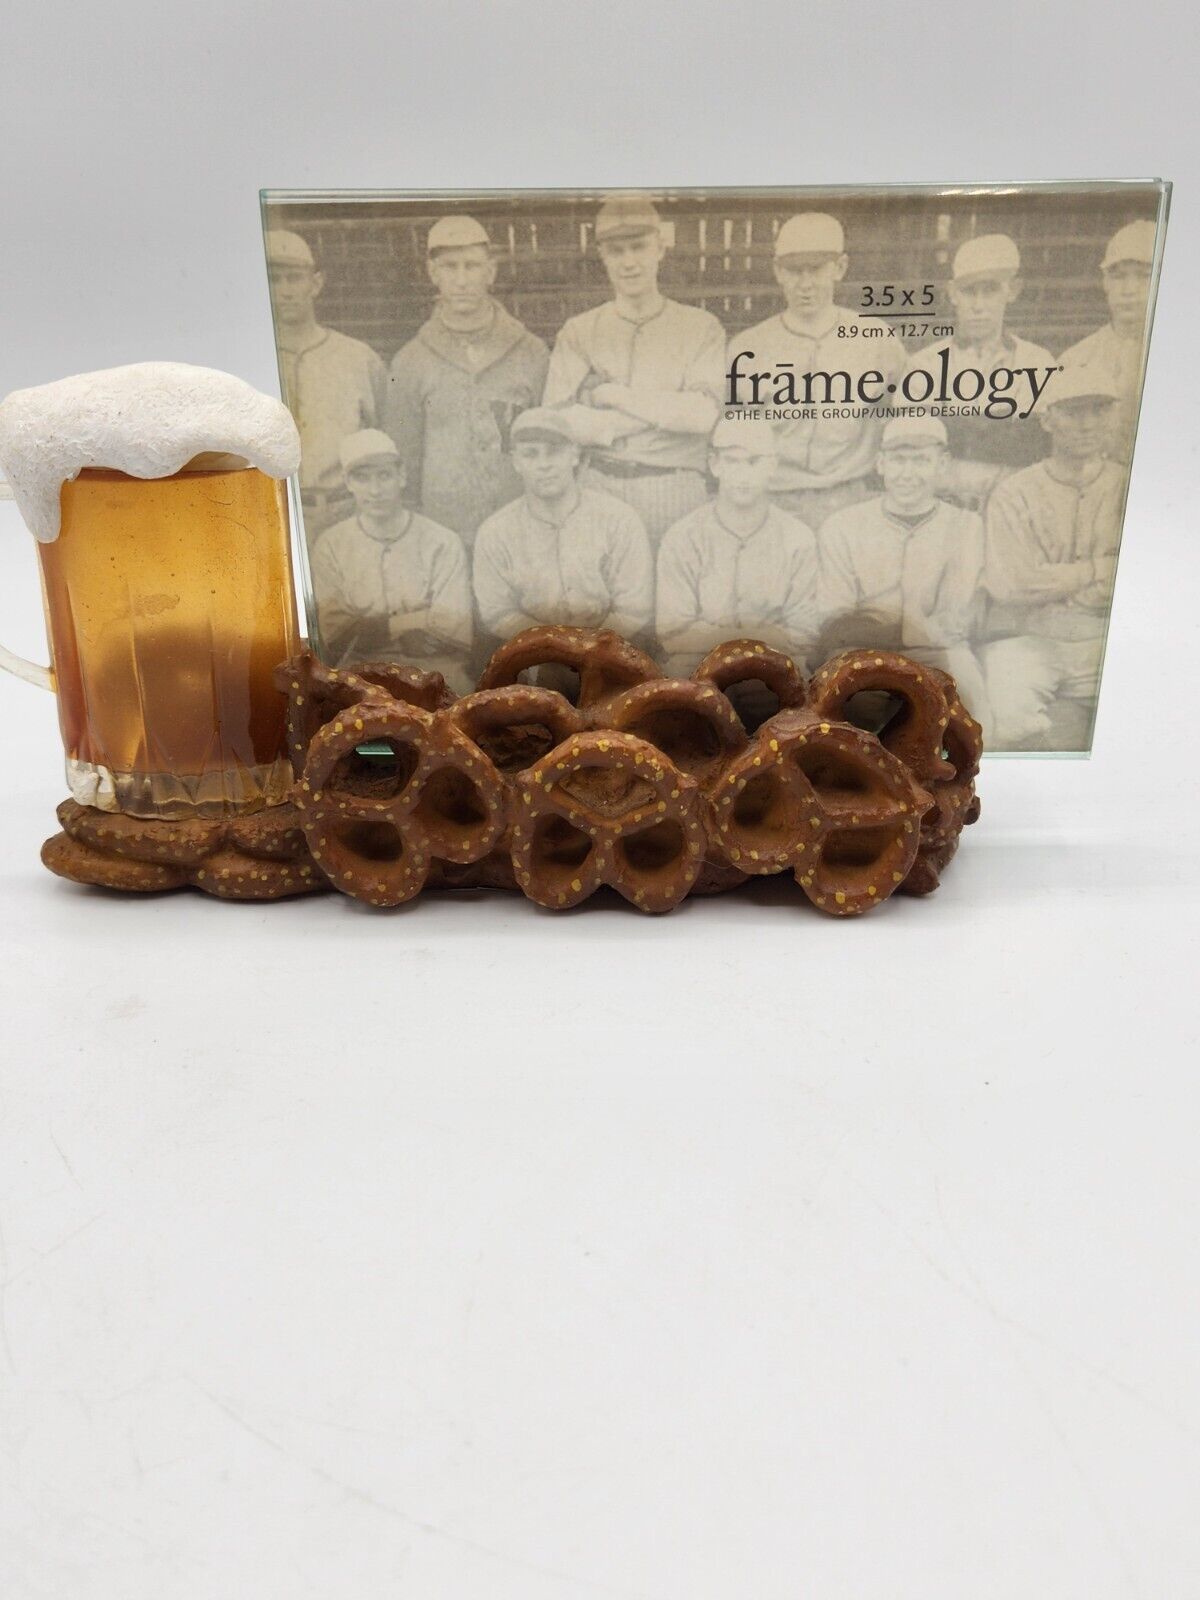 Frame-ology 3.5 x 5 Beer and Pretzels Picture holder frame with glass